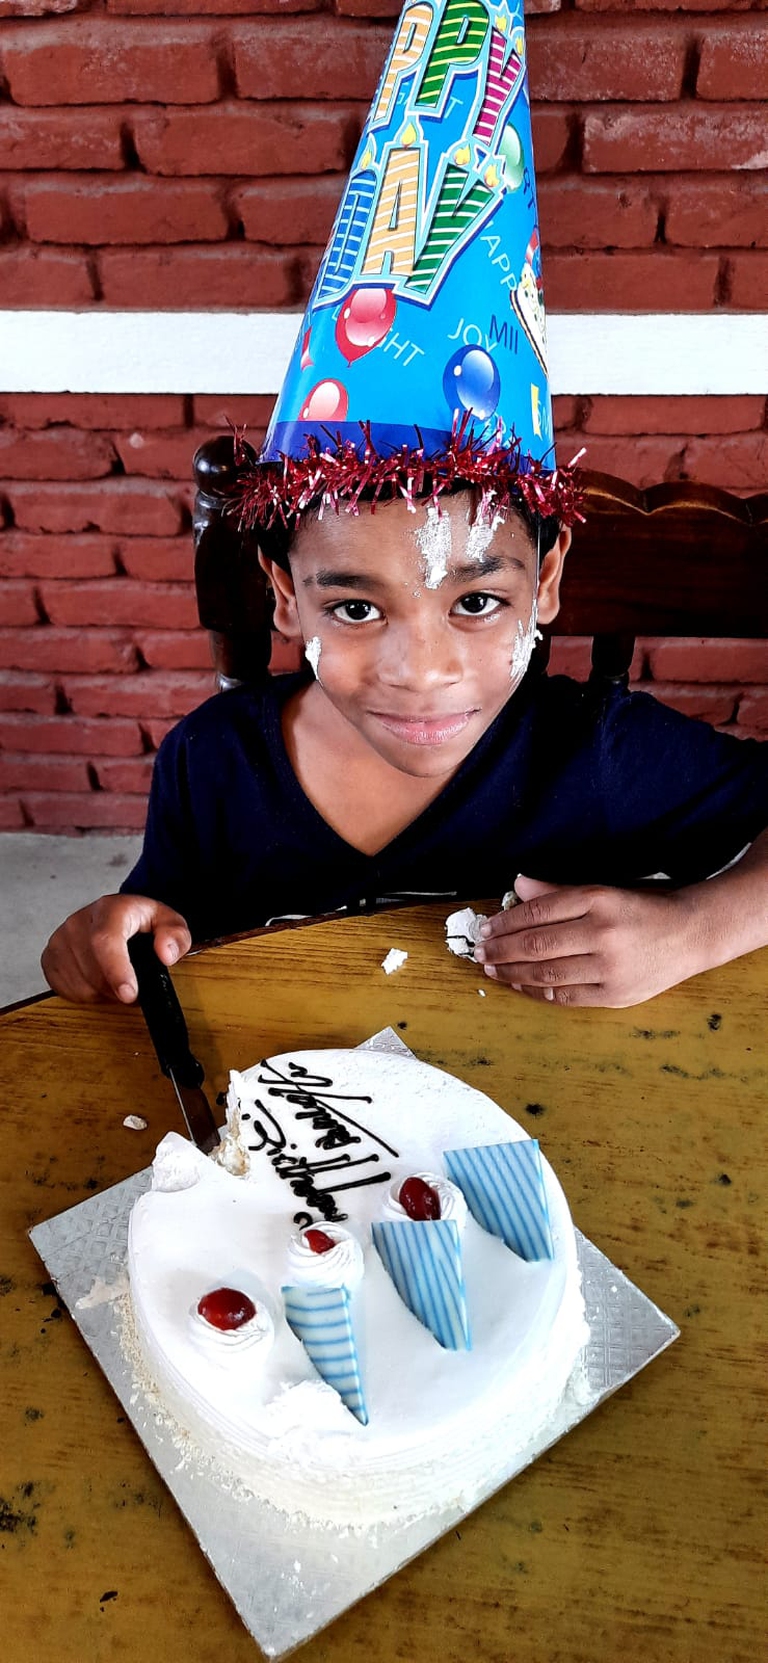 A boy celebrating his birthday party at the transit home.